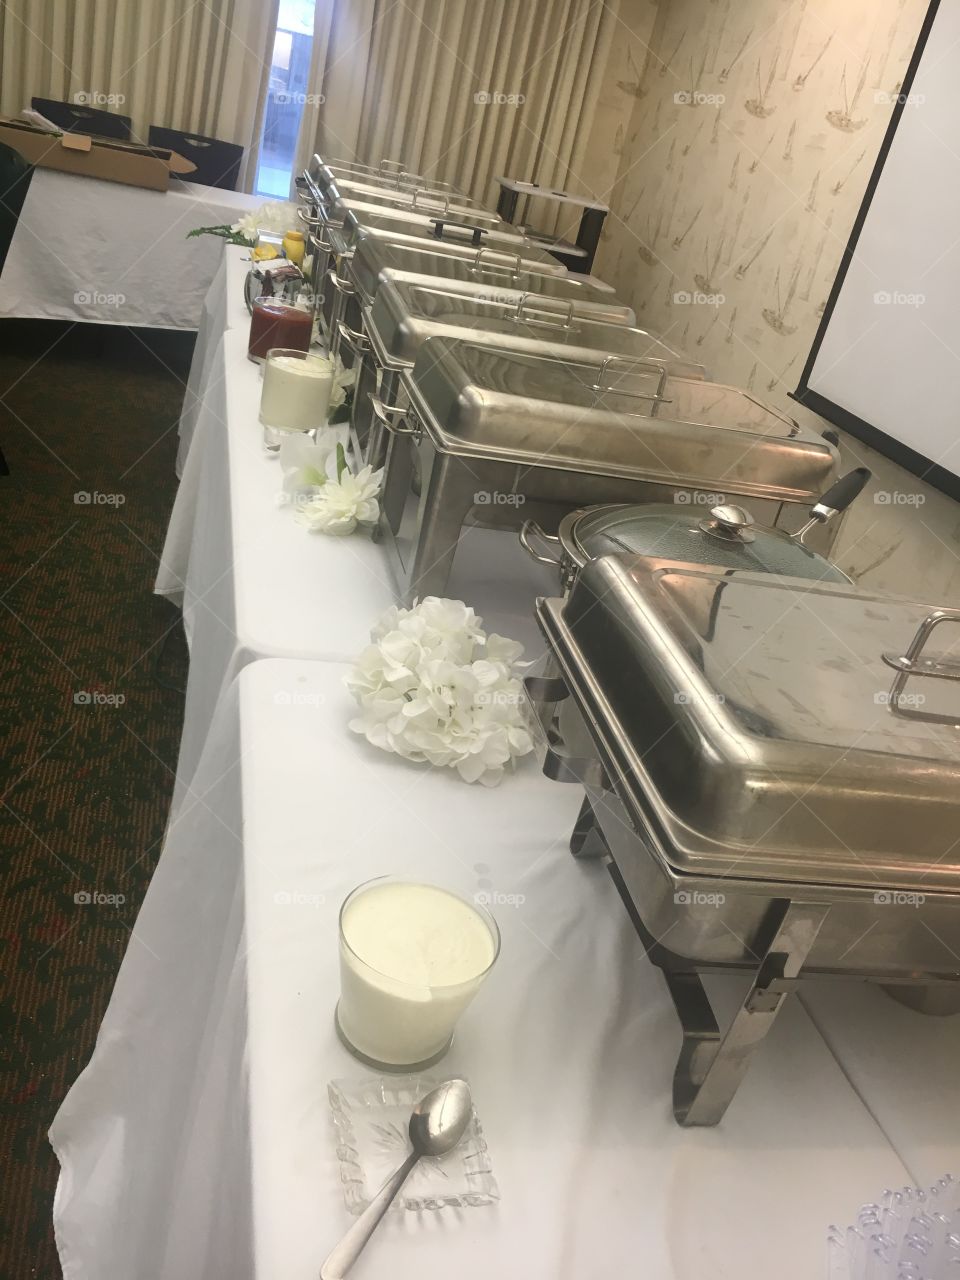 Catering 